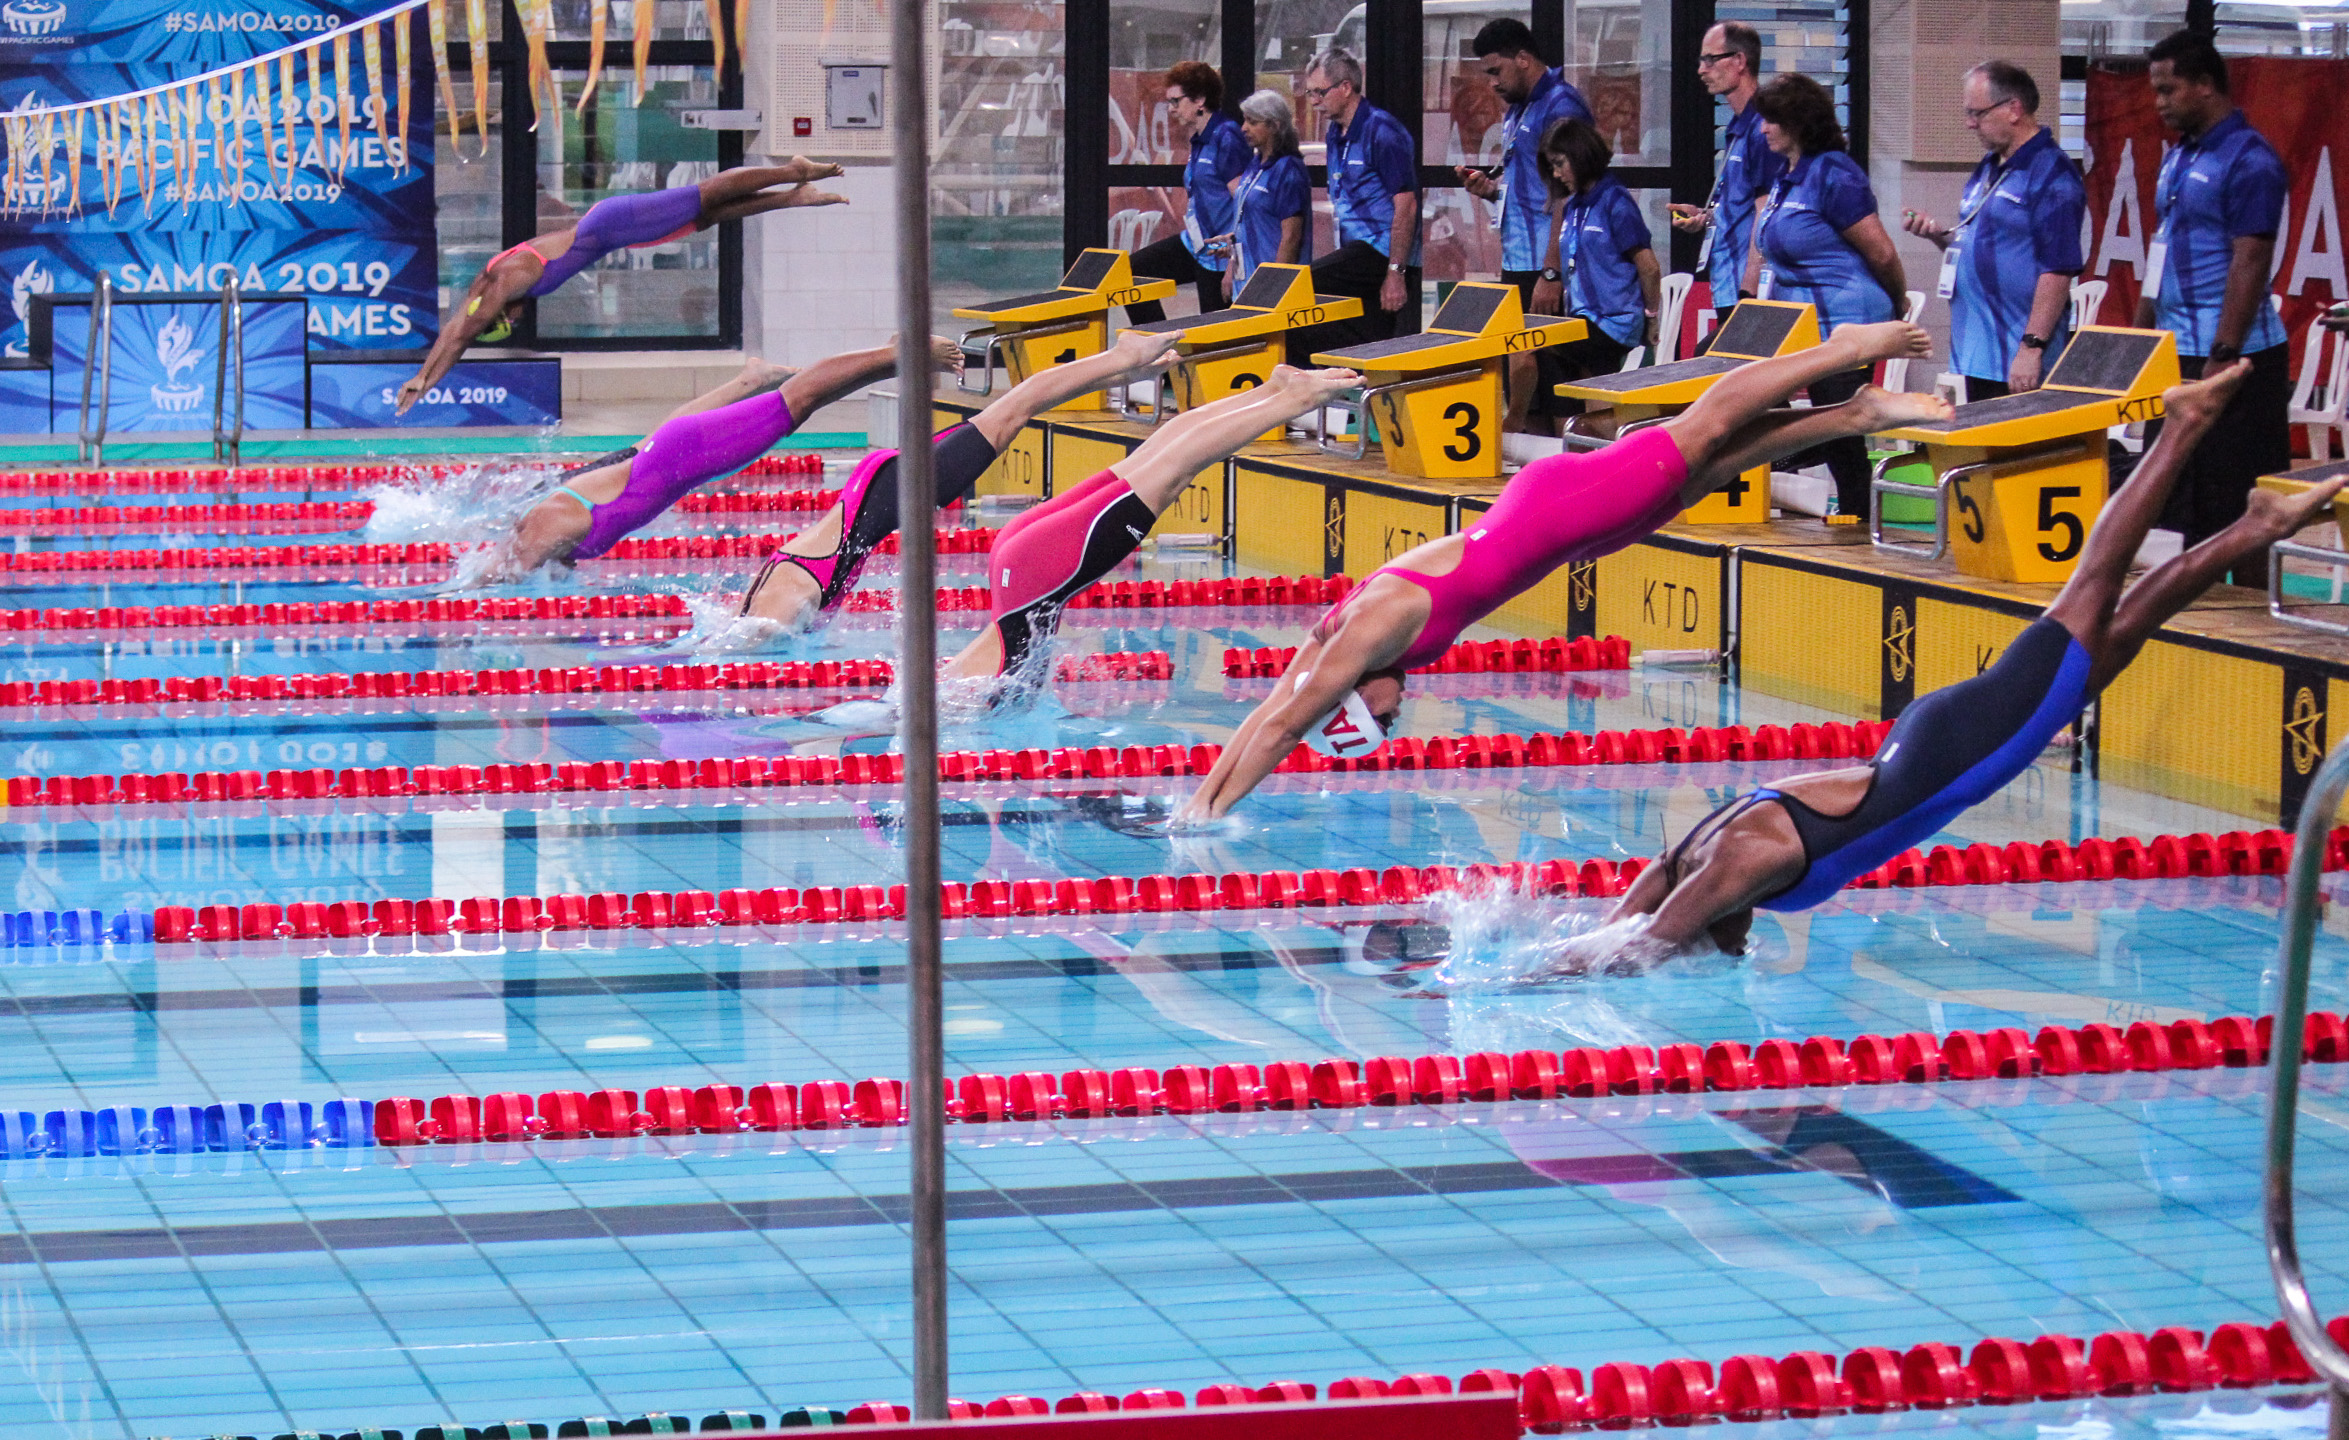 Swimmers jumping into a pool to race